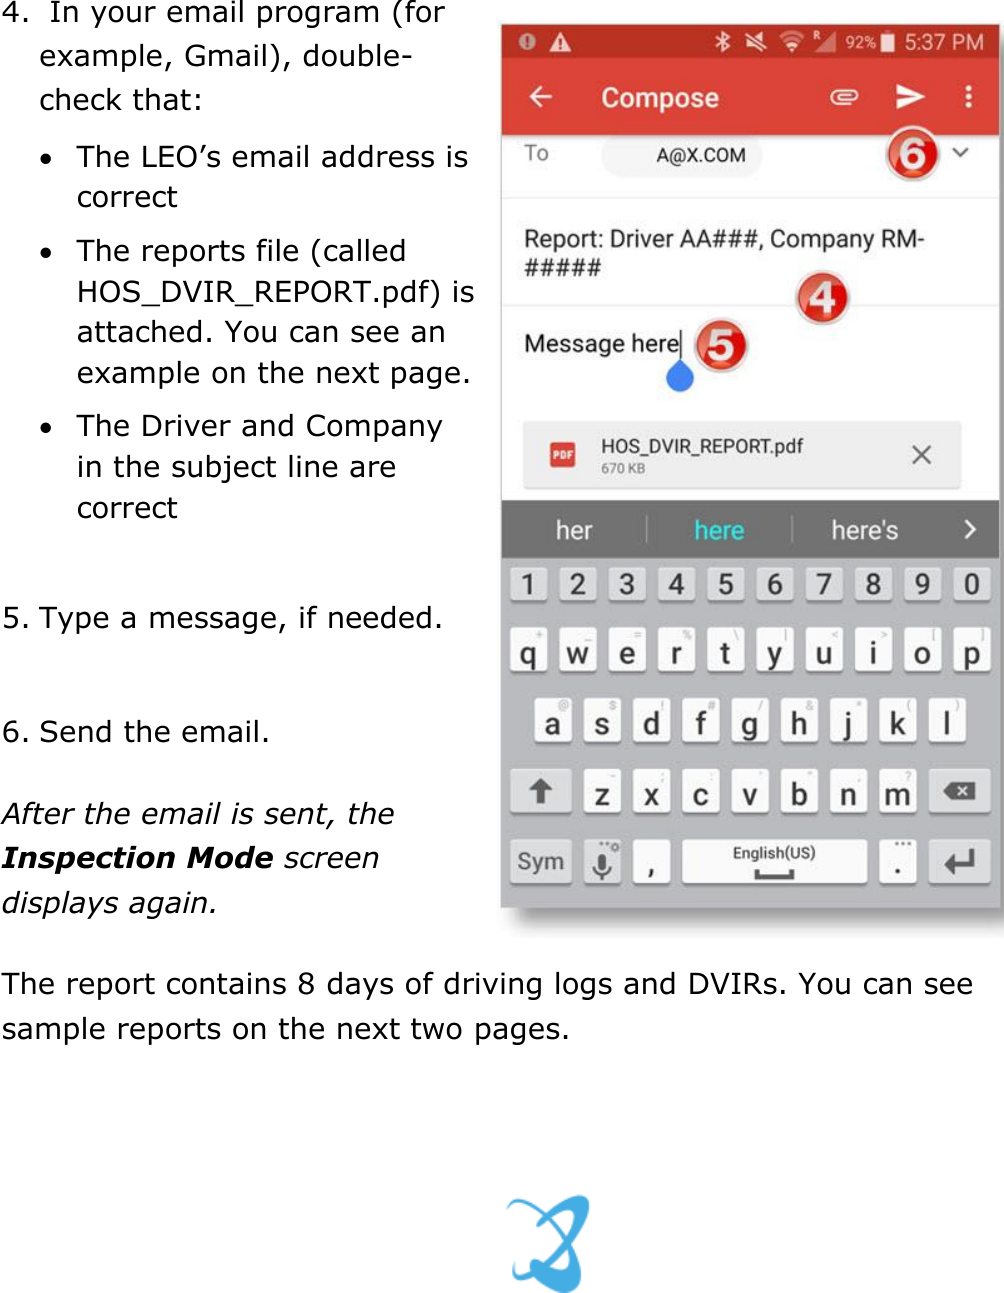 Use Inspection Mode DriverConnect User Guide  65 © 2016-2017, Rand McNally, Inc. 4.  In your email program (for example, Gmail), double-check that:  The LEO’s email address is correct  The reports file (called HOS_DVIR_REPORT.pdf) is attached. You can see an example on the next page.  The Driver and Company in the subject line are correct  5. Type a message, if needed.  6. Send the email. After the email is sent, the Inspection Mode screen displays again. The report contains 8 days of driving logs and DVIRs. You can see sample reports on the next two pages.    